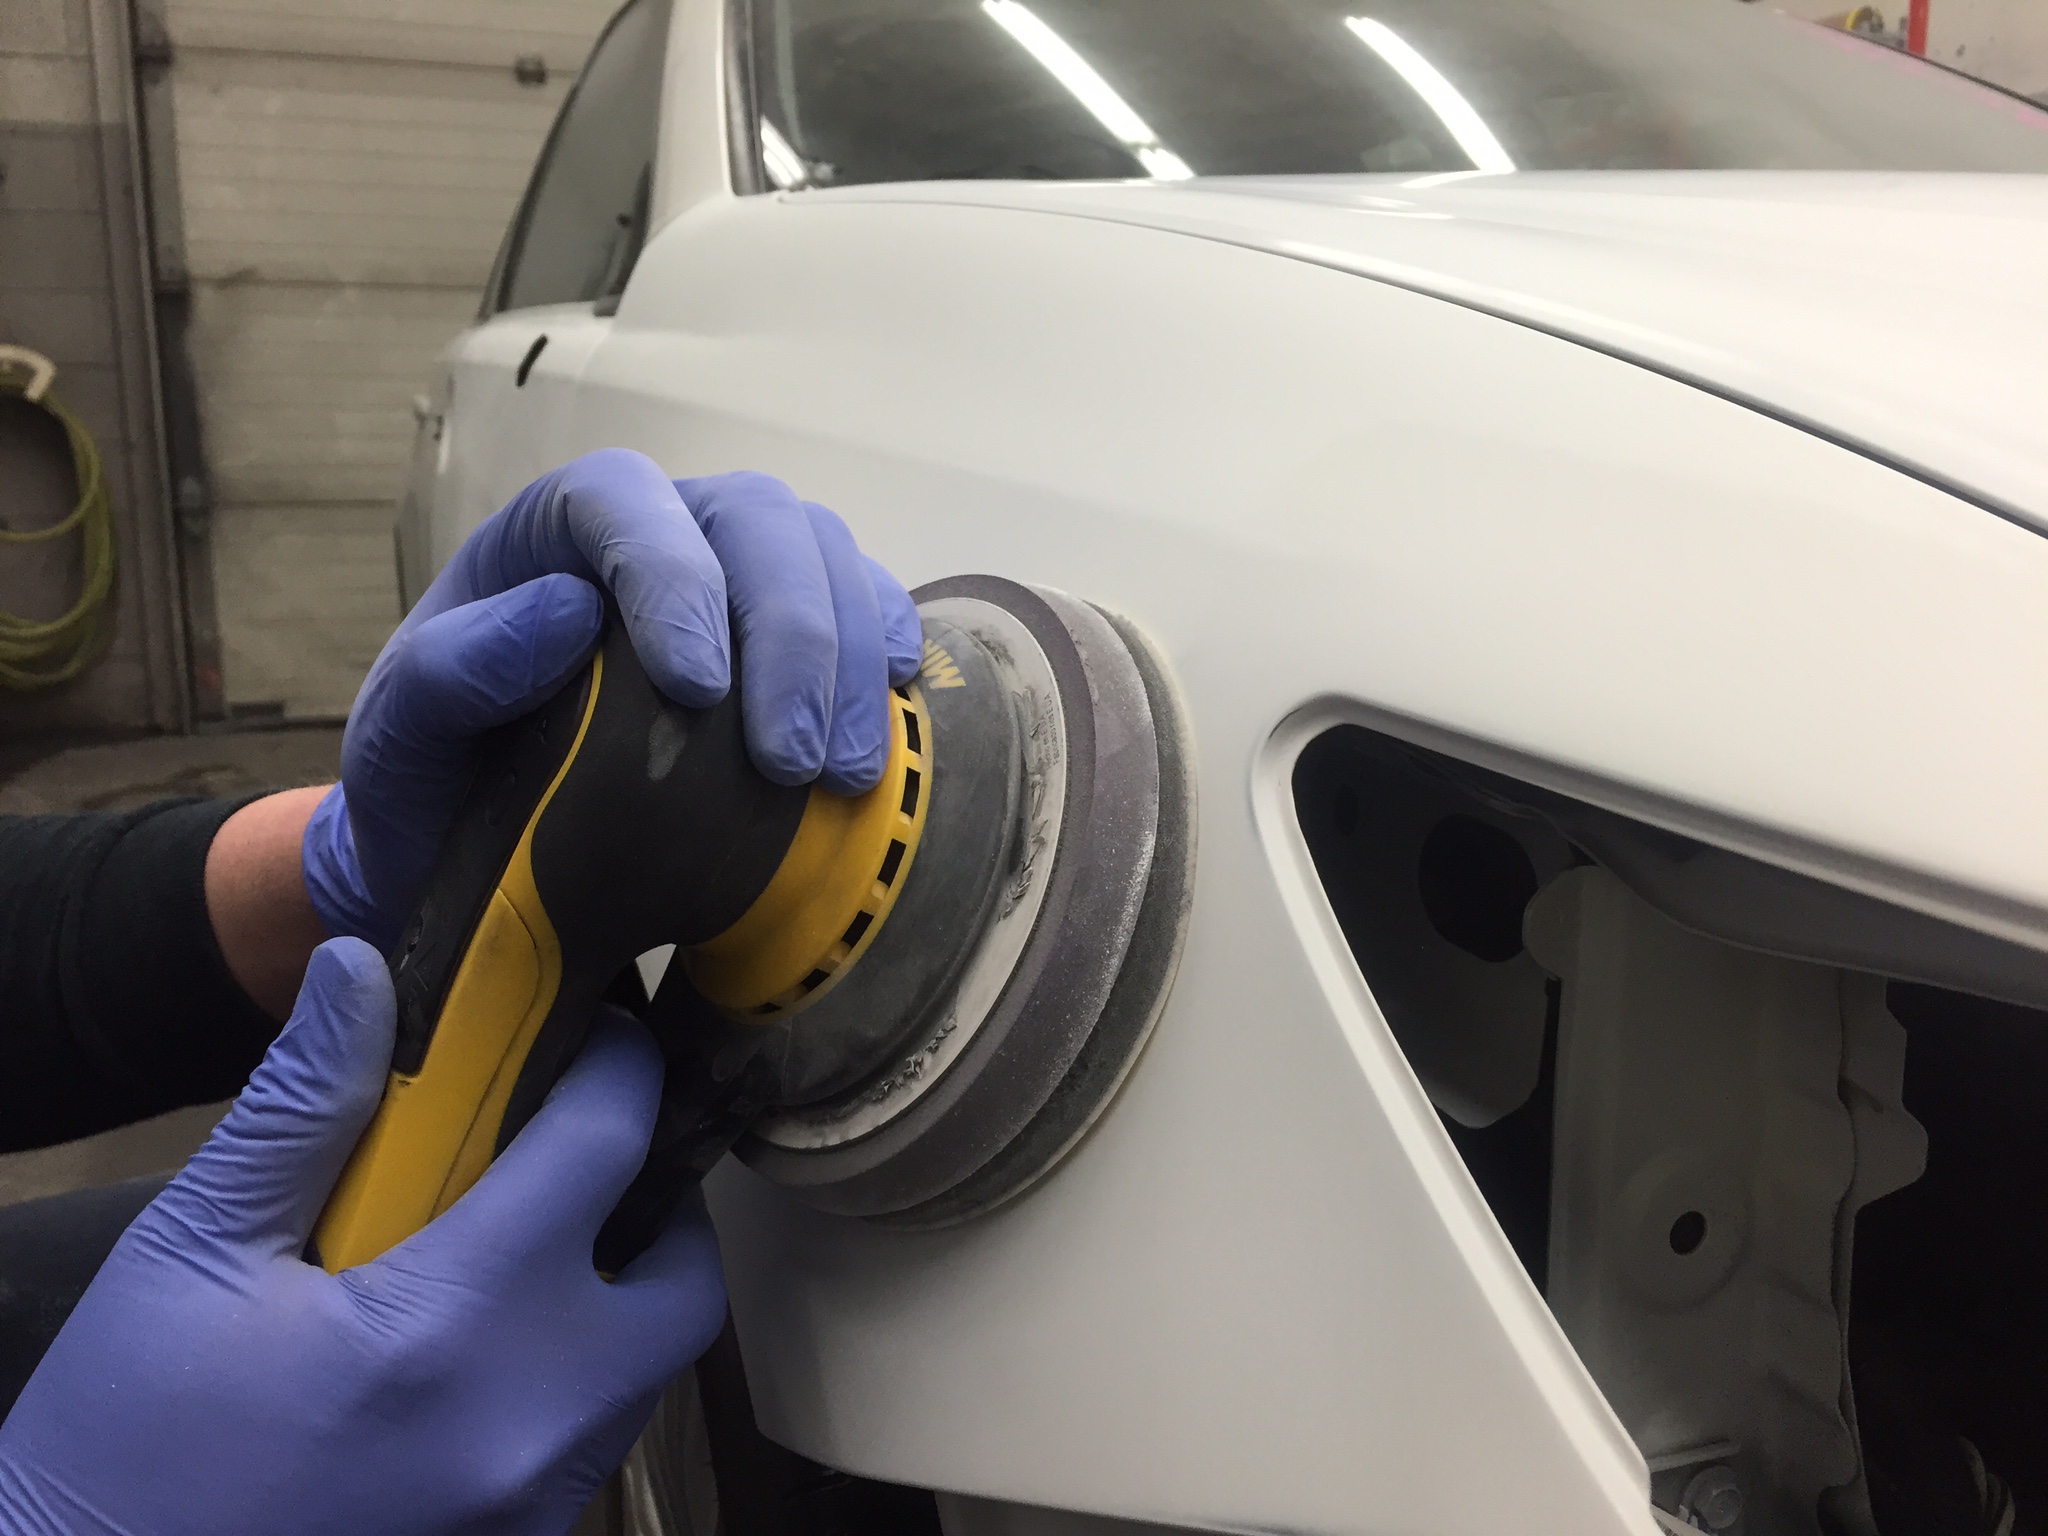 At Advanced Collision Repair, we handle bumper scuffs, scrapes, and scratches with professional Dupont products.